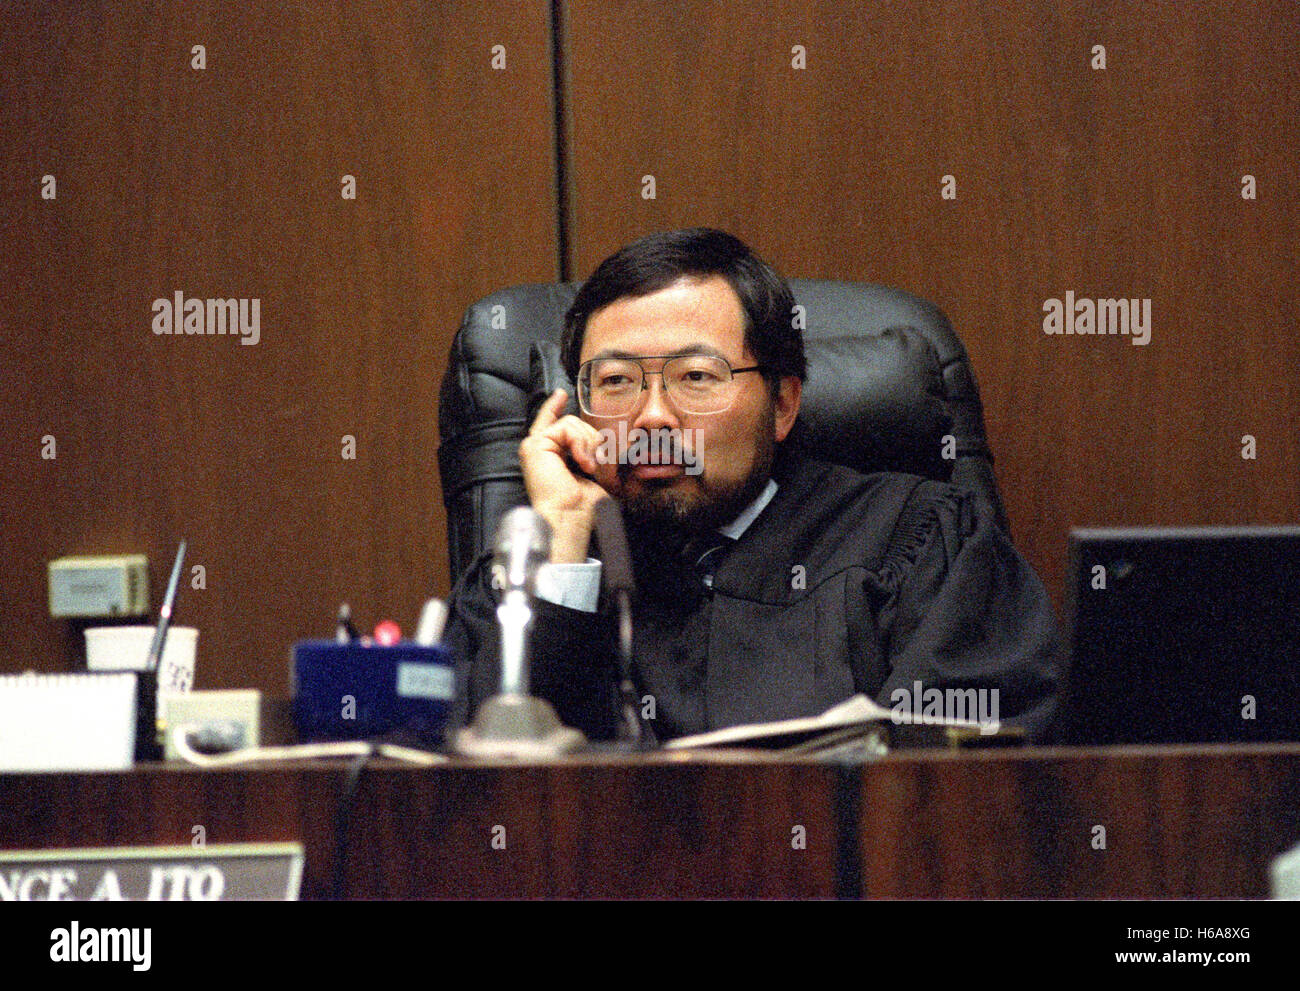 July 13, 1995 - Los Angeles, California, United States of America - Superior Court Judge Lance Ito presides during the trial of former NFL star running back O.J. Simpson for the murder of his former wife, Nicole Brown Simpson and a friend of hers, restaurant waiter, Ron Goldman in Los Angeles County Superior Court in Los Angeles, California on July 13, 1995..Credit: Steve Grayson / Pool via CNP (Credit Image: © Steve Grayson/CNP via ZUMA Wire) Stock Photo